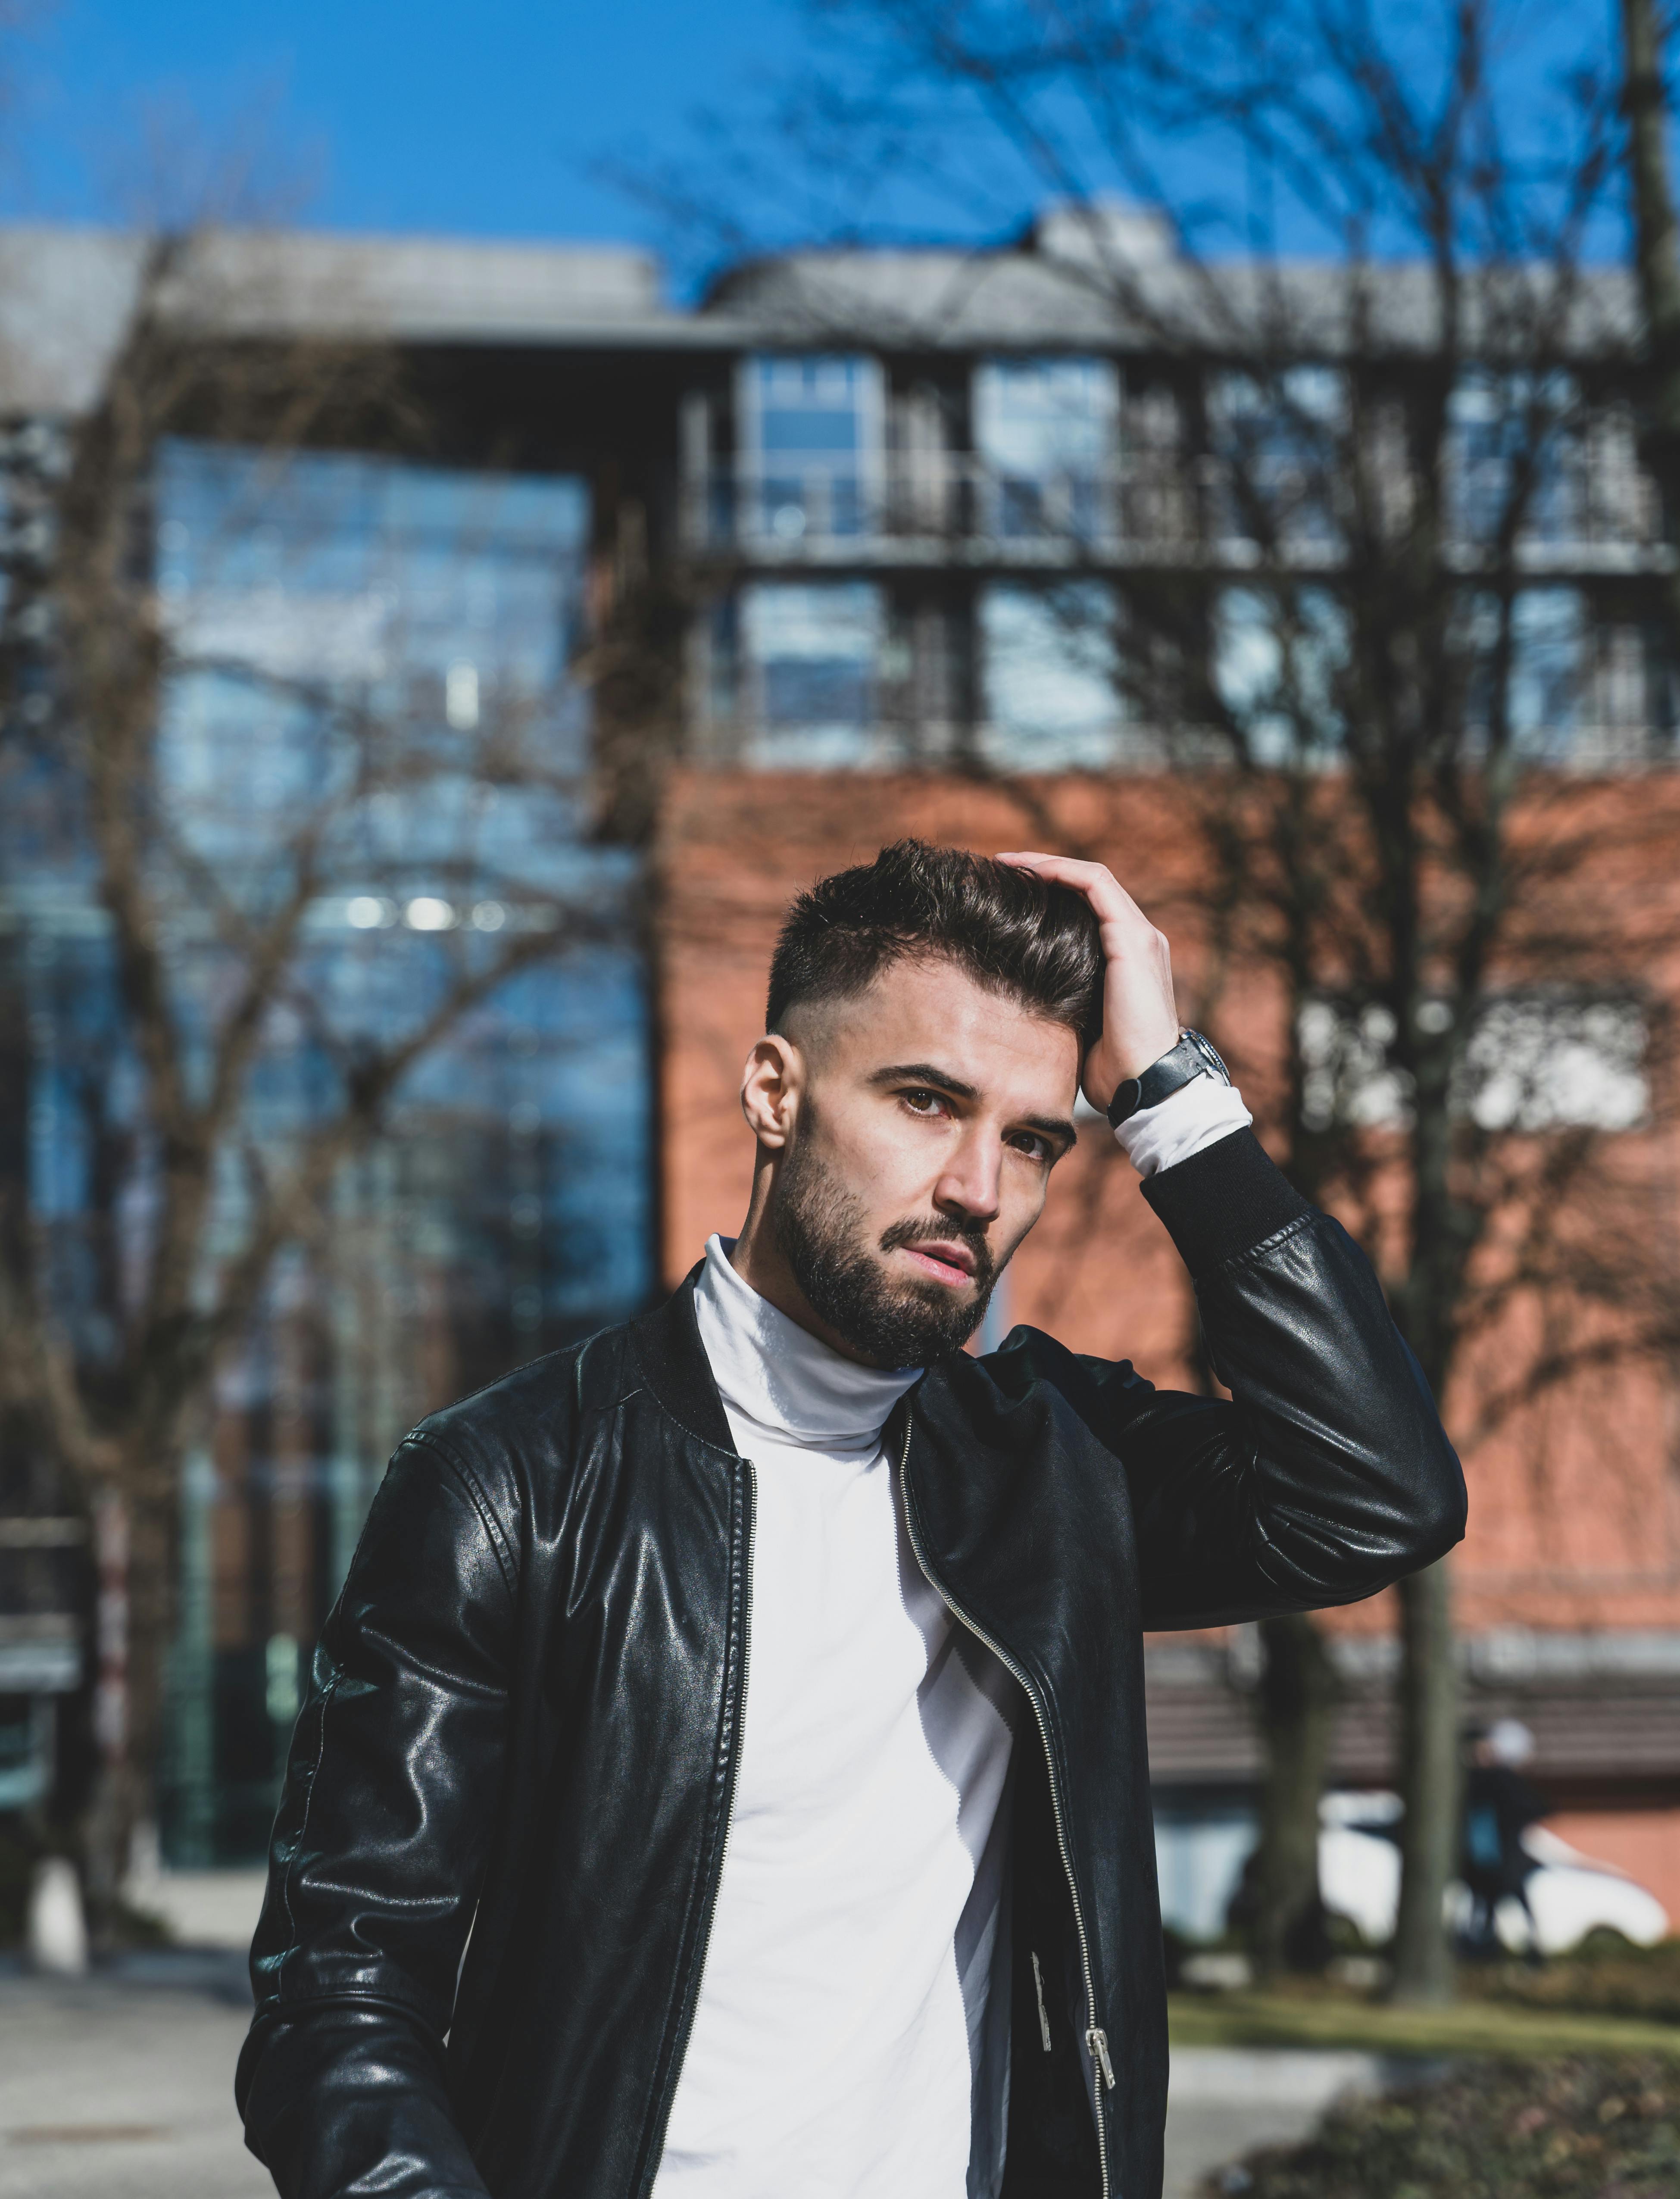 Man in Black Leather Jacket Holding His Hair · Free Stock Photo